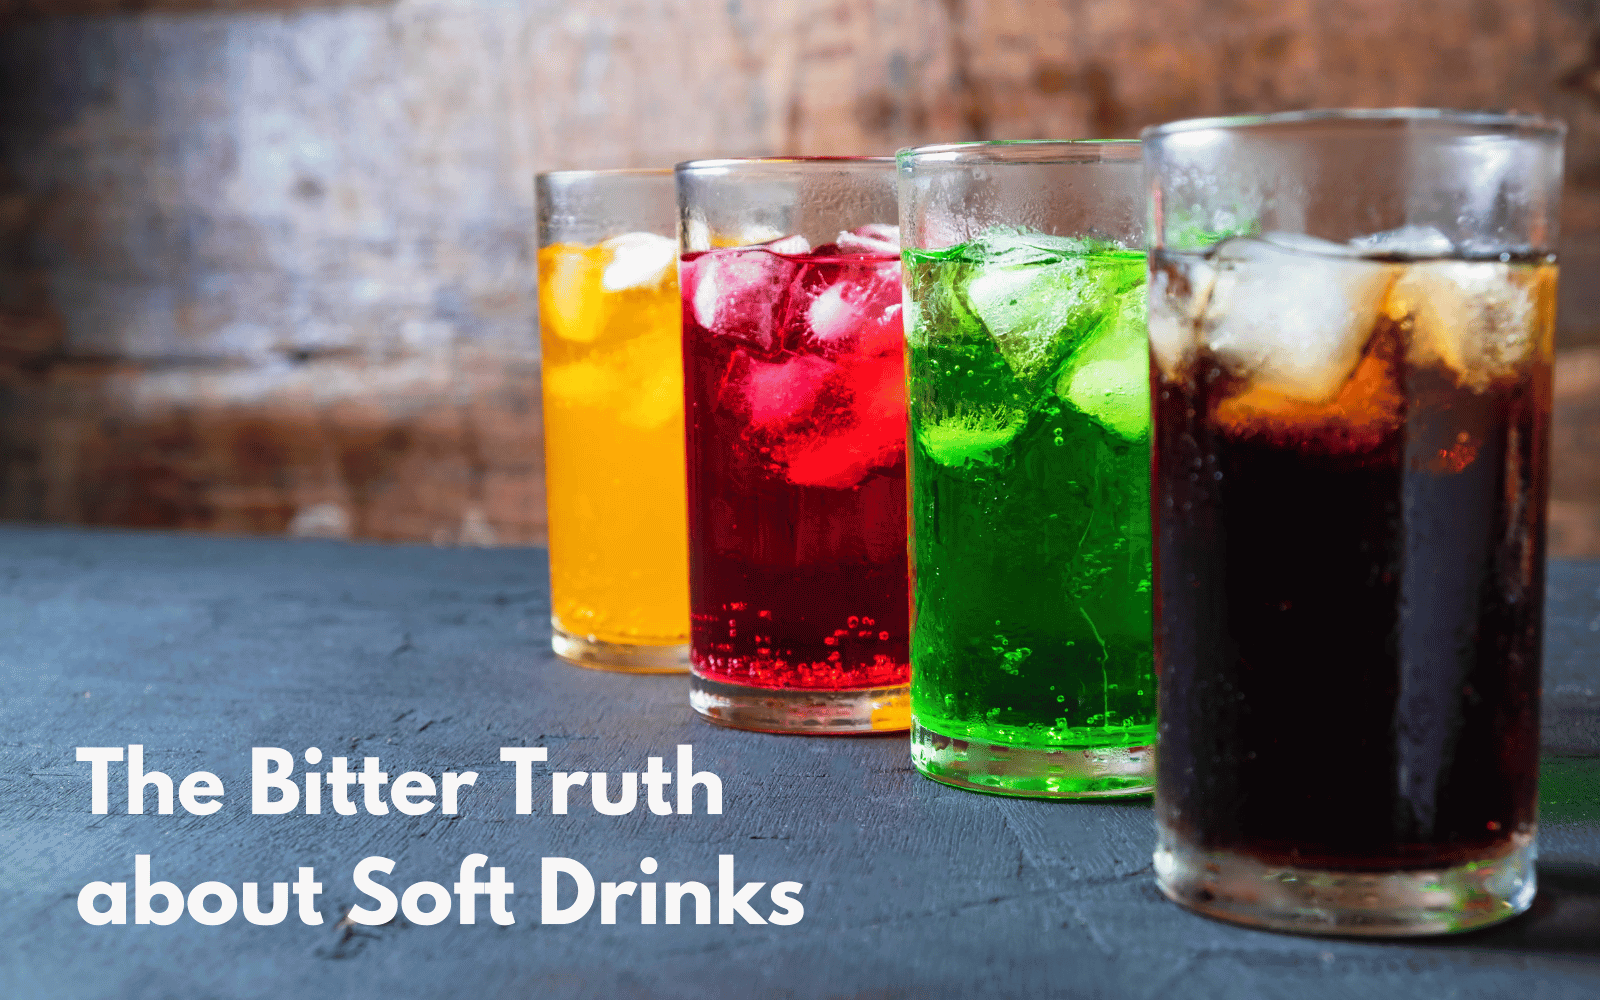 The Bitter Truth about Soft Drinks